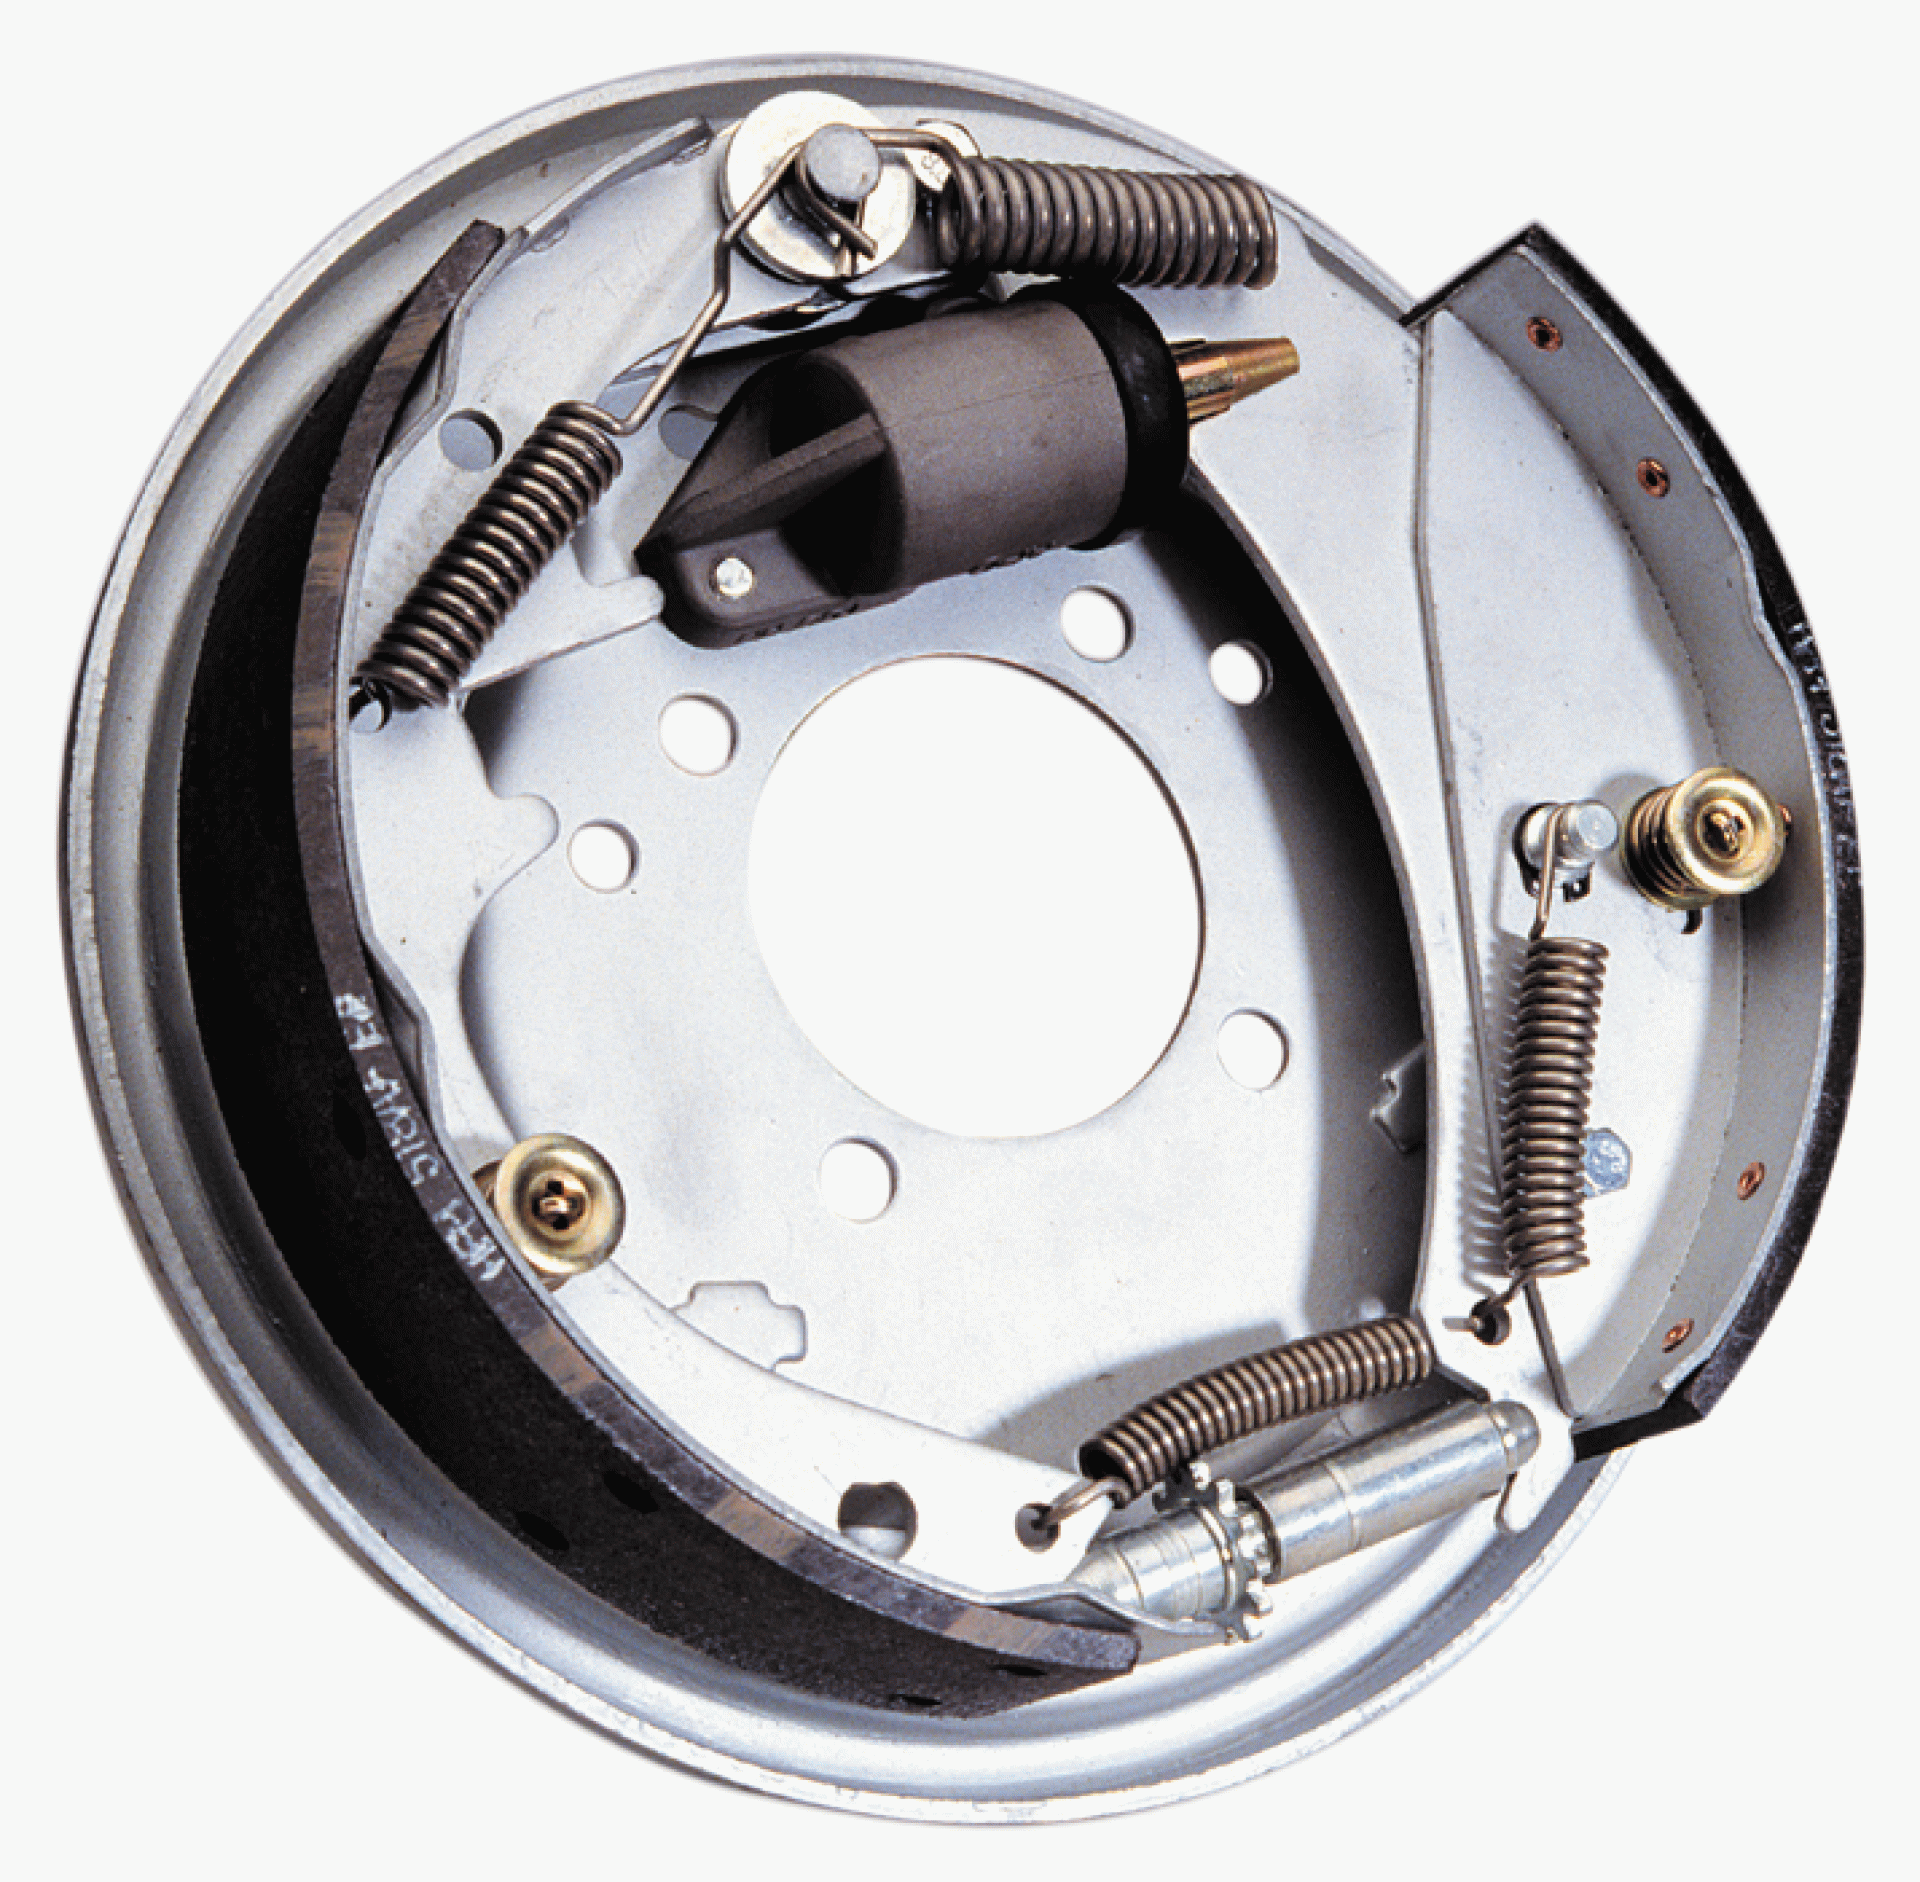 DEXTER MARINE PRODUCTS OF GEORGIA LC | 81097 | BRAKE DRUM ASSEMBLY 10" X 2 1/4" FREE BACKING GALVX (LEFT & RIGHT)